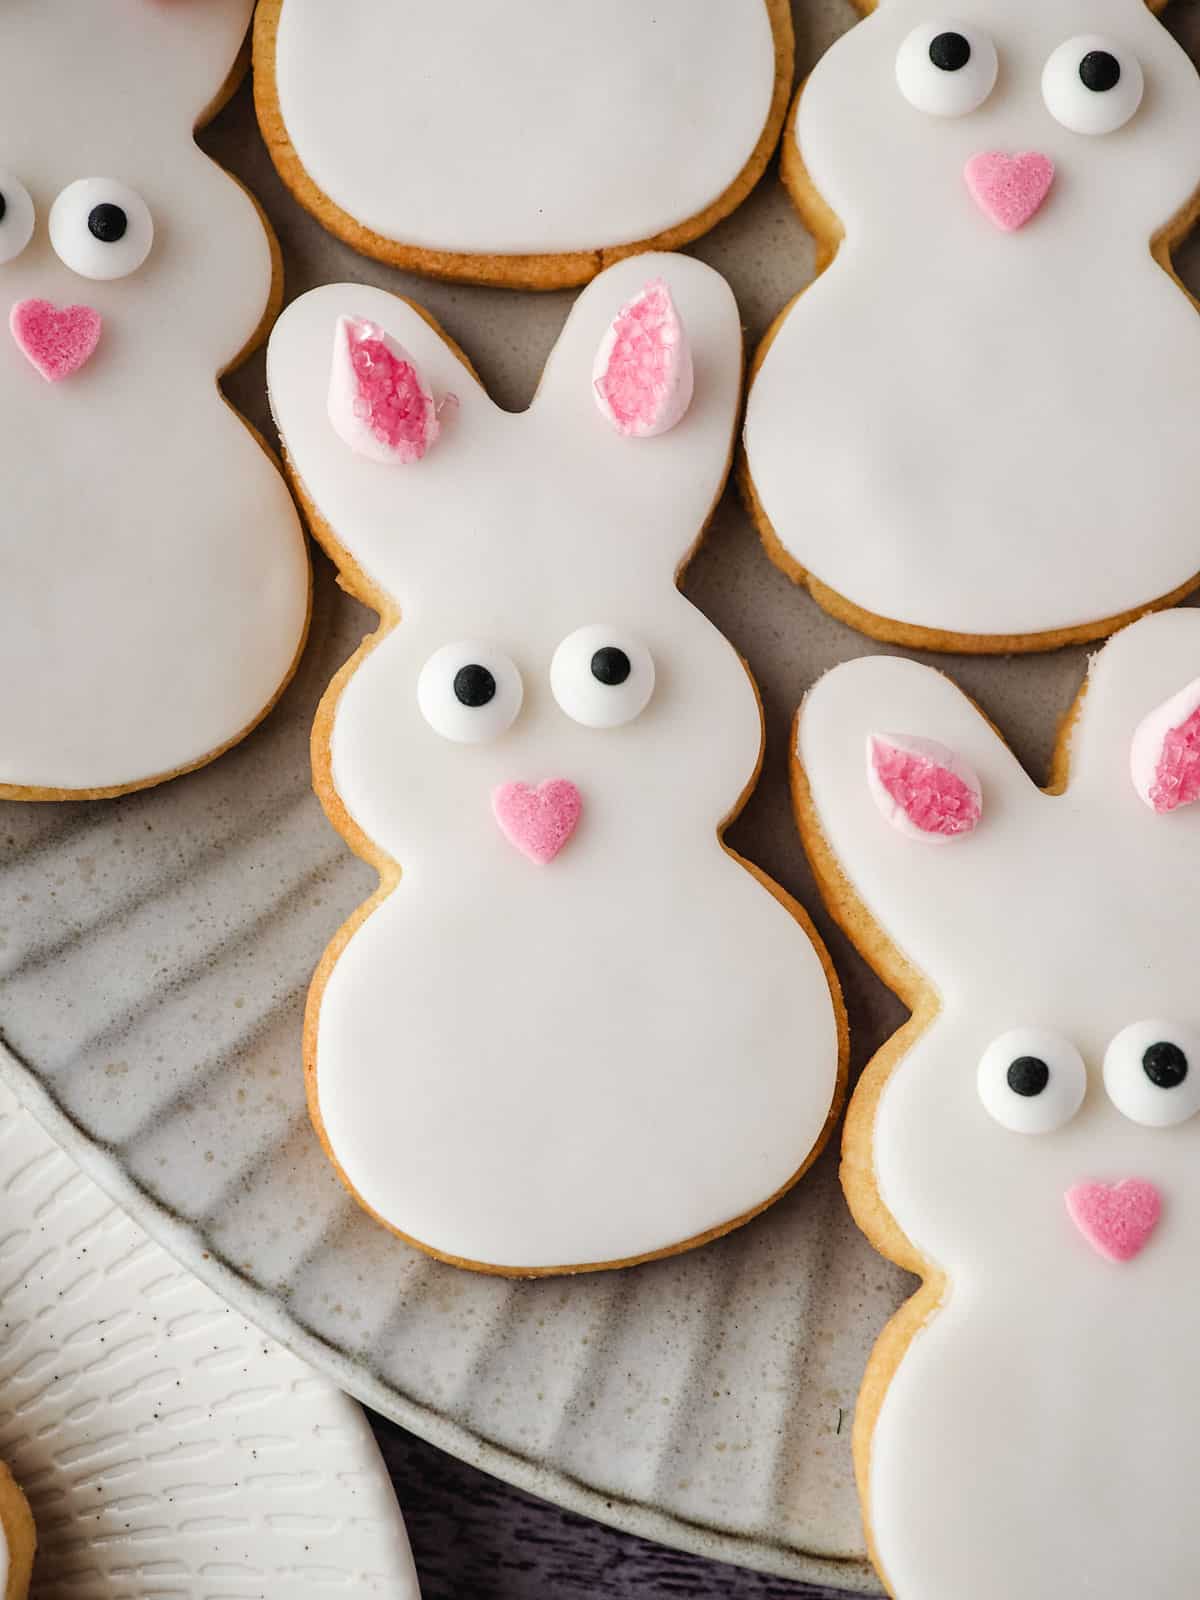 Bunny cookies on a plate.